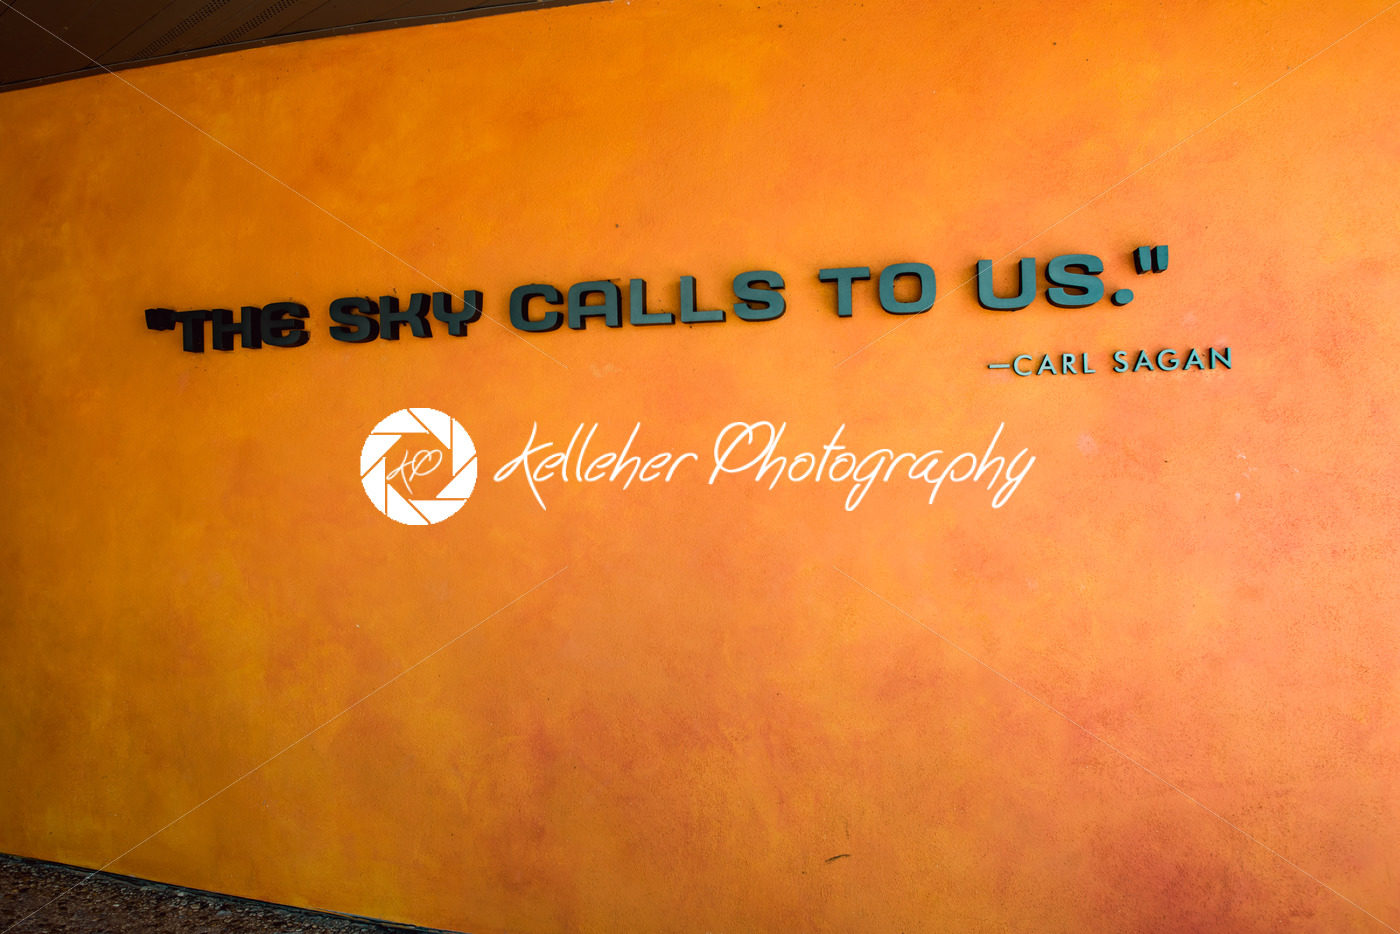 Cape Canaveral, Florida – August 13, 2018: Quote The sky calls to us by Carl Sagan at NASA Kennedy Space Center - Kelleher Photography Store